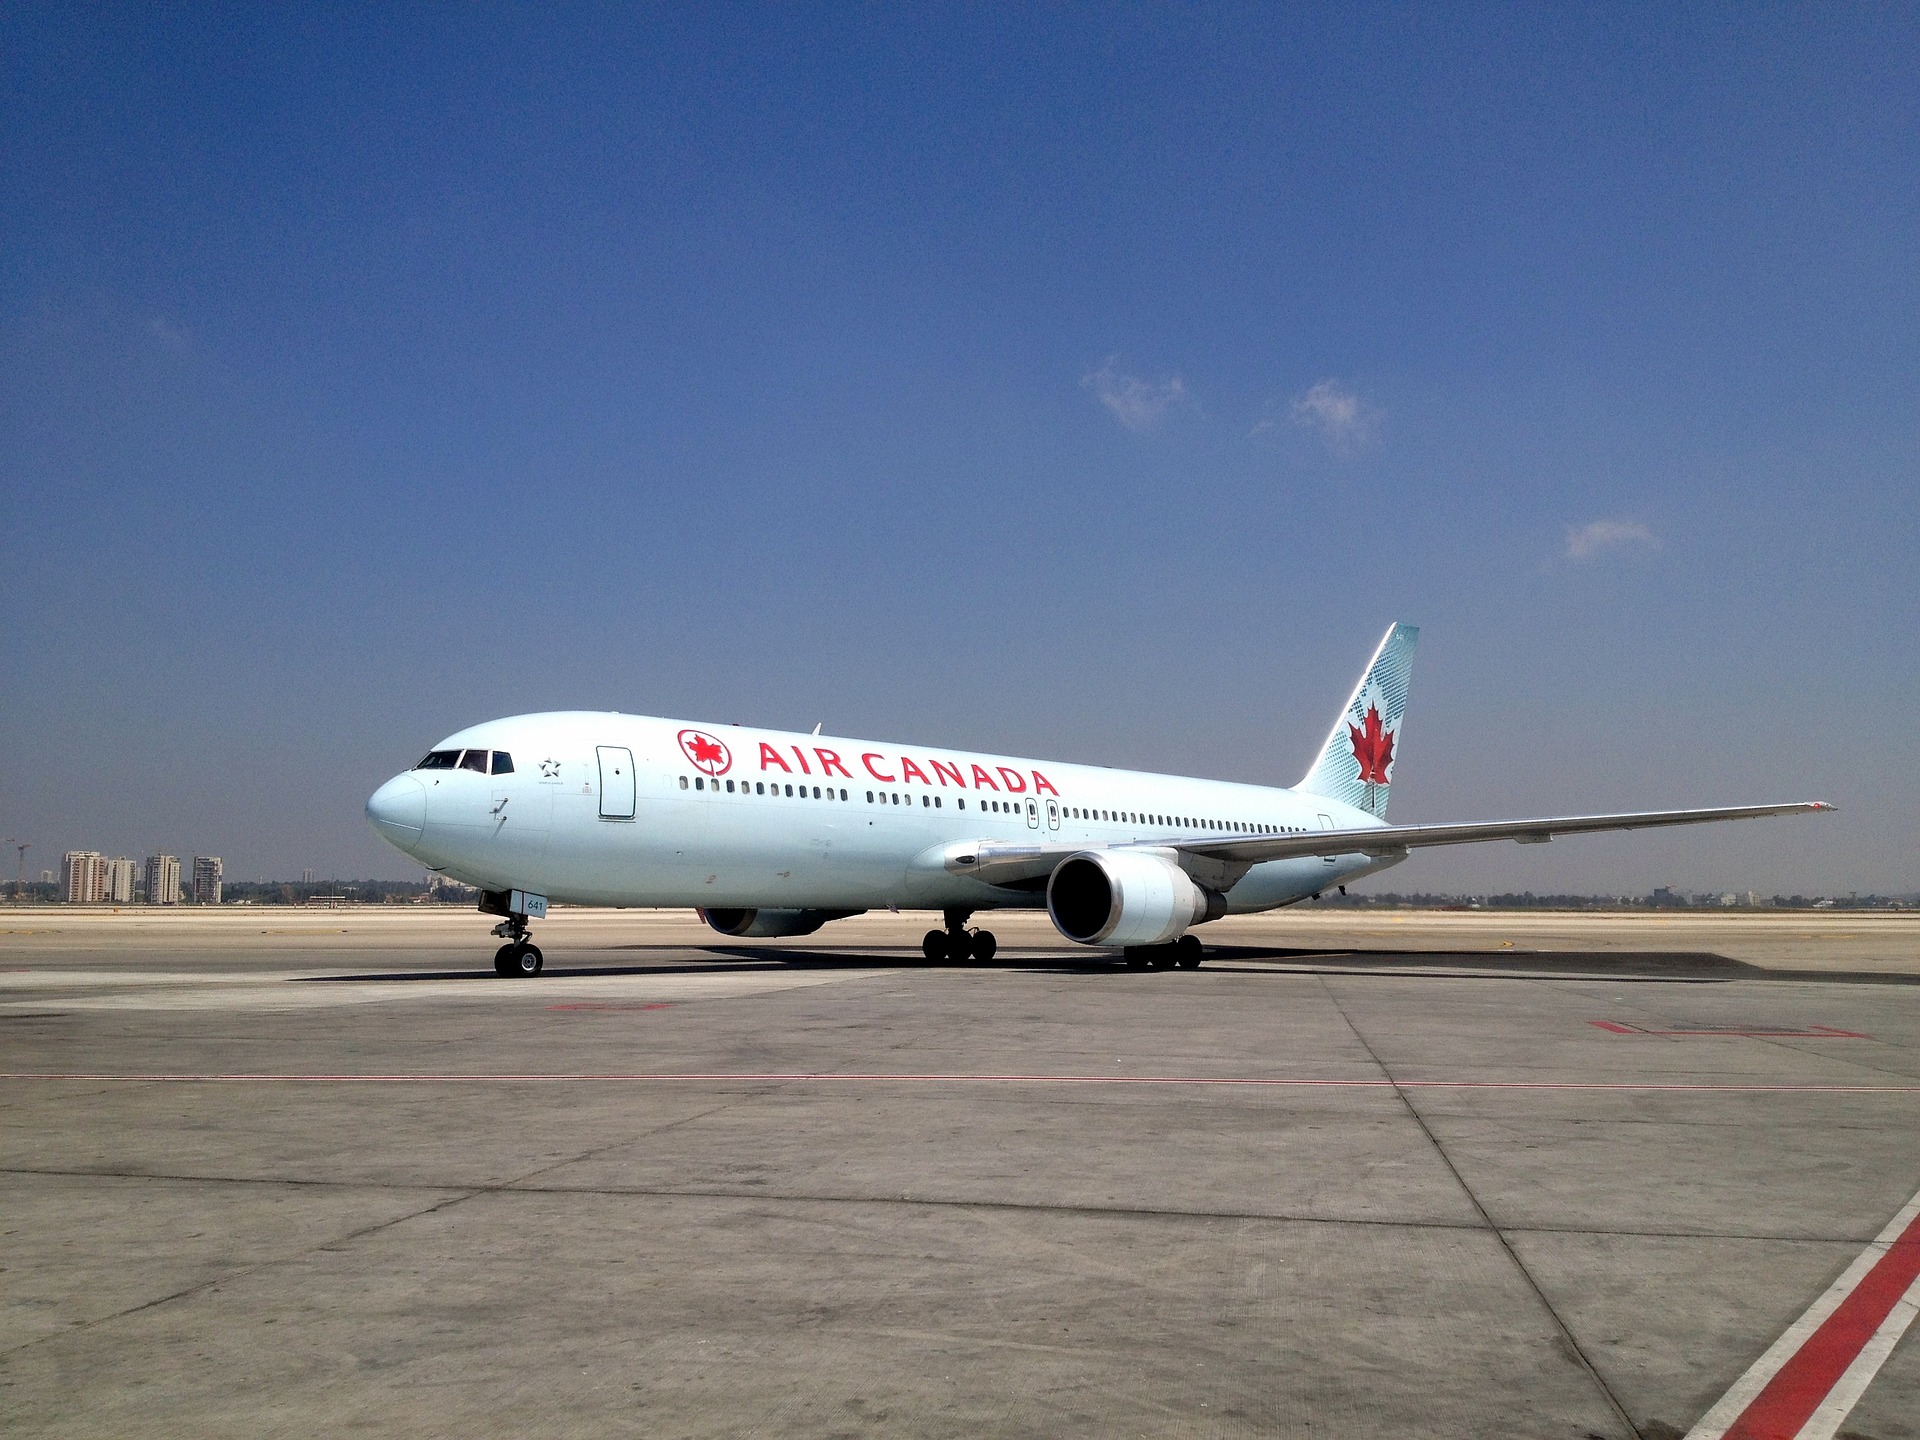 Air Canada plane featured here; the airline has many partners through which you can earn miles to fly for free